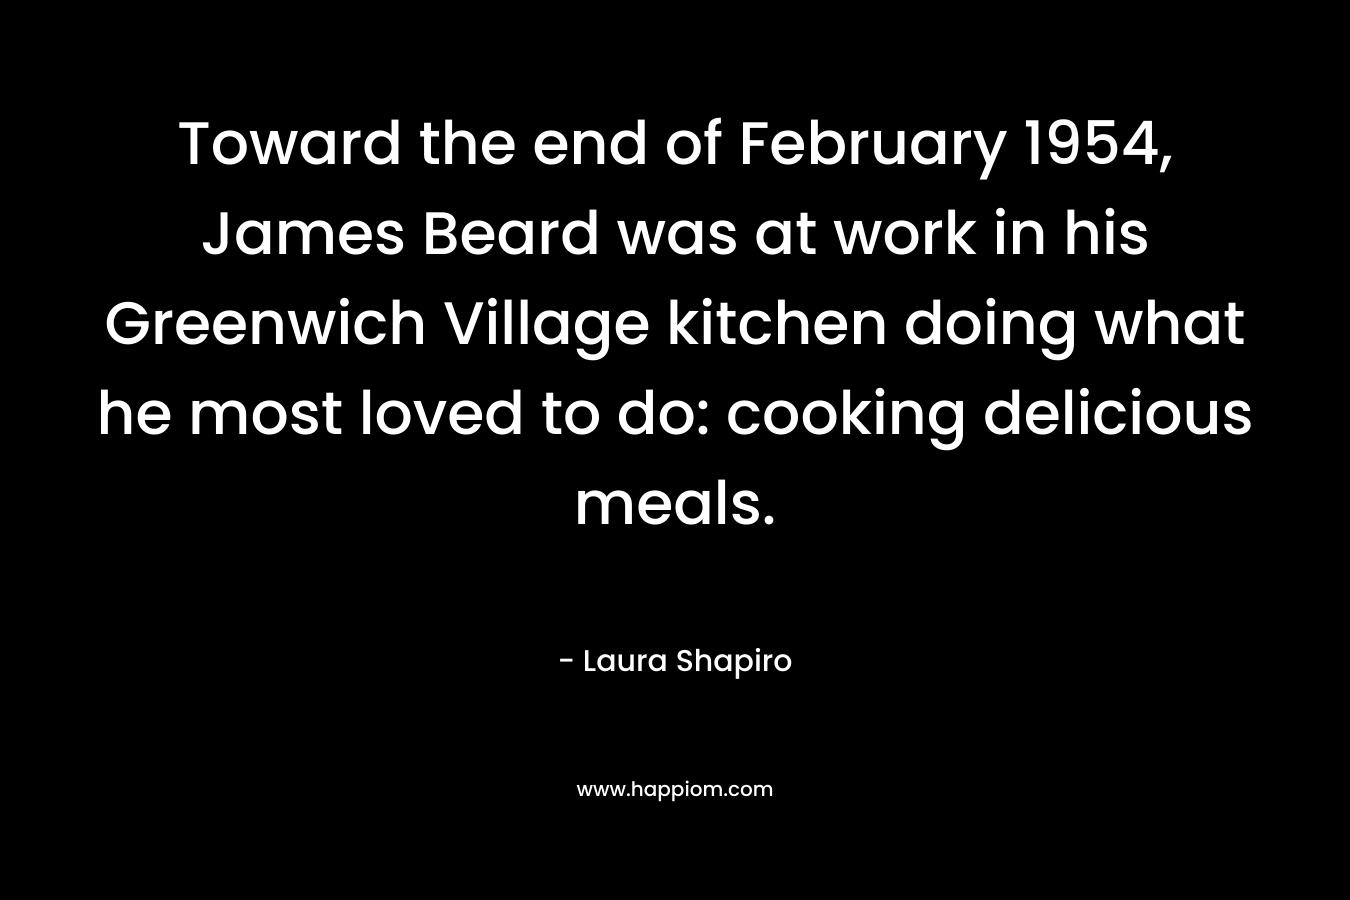 Toward the end of February 1954, James Beard was at work in his Greenwich Village kitchen doing what he most loved to do: cooking delicious meals. – Laura Shapiro